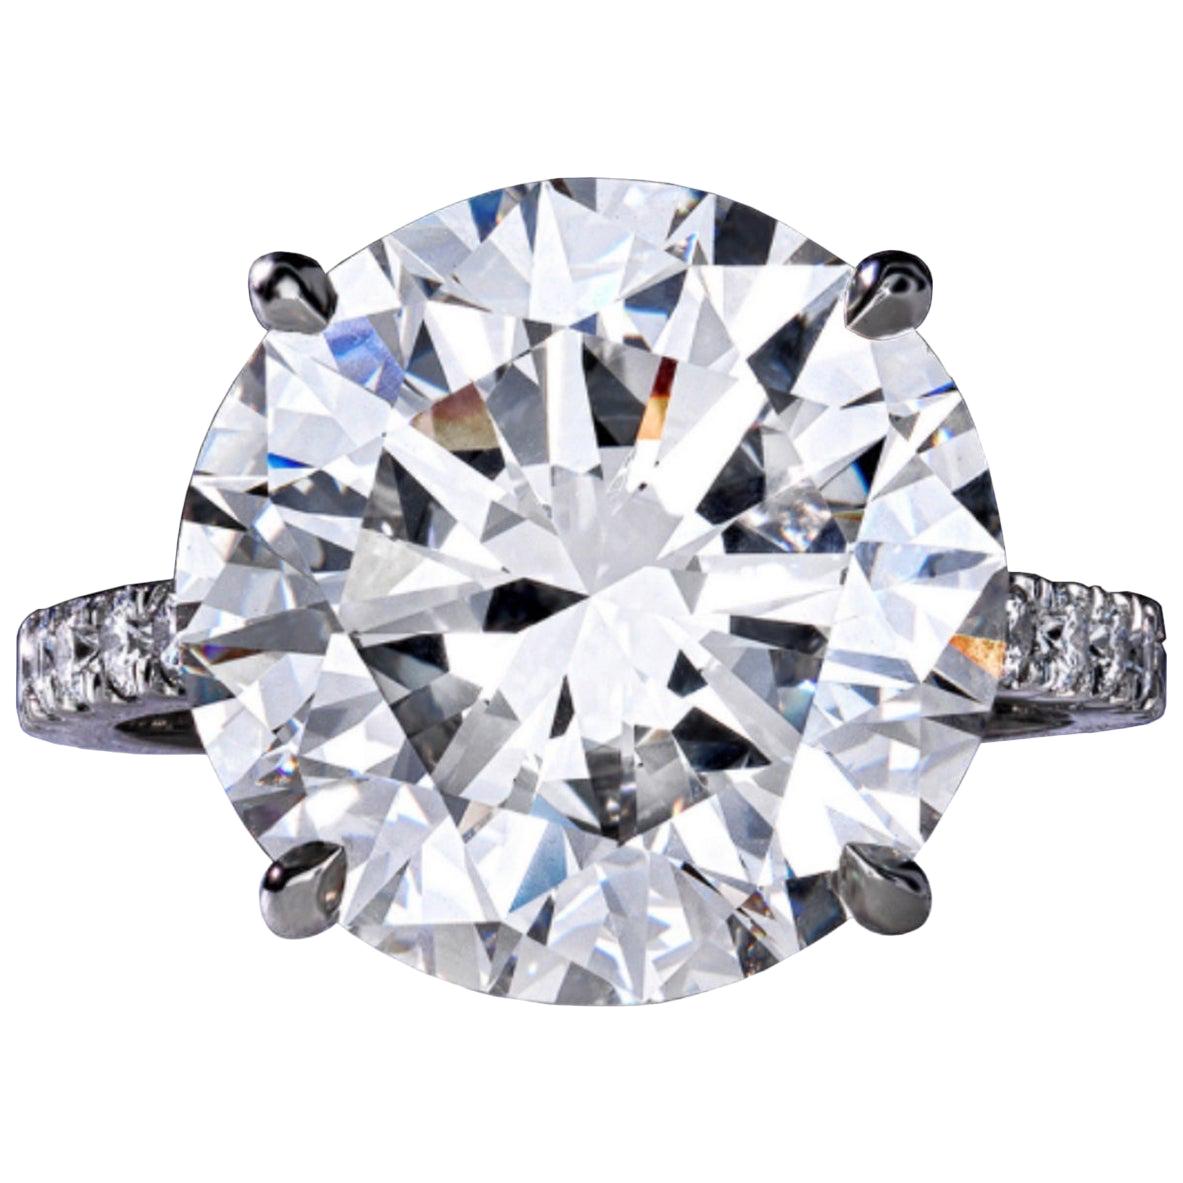 This exquisite piece by Antinori Di Sanpietro® features a breathtaking 10 ct round diamond that radiates unmatched brilliance. Graded by the Gemological Institute of America (GIA), the centerpiece diamond boasts an F color, ensuring a nearly